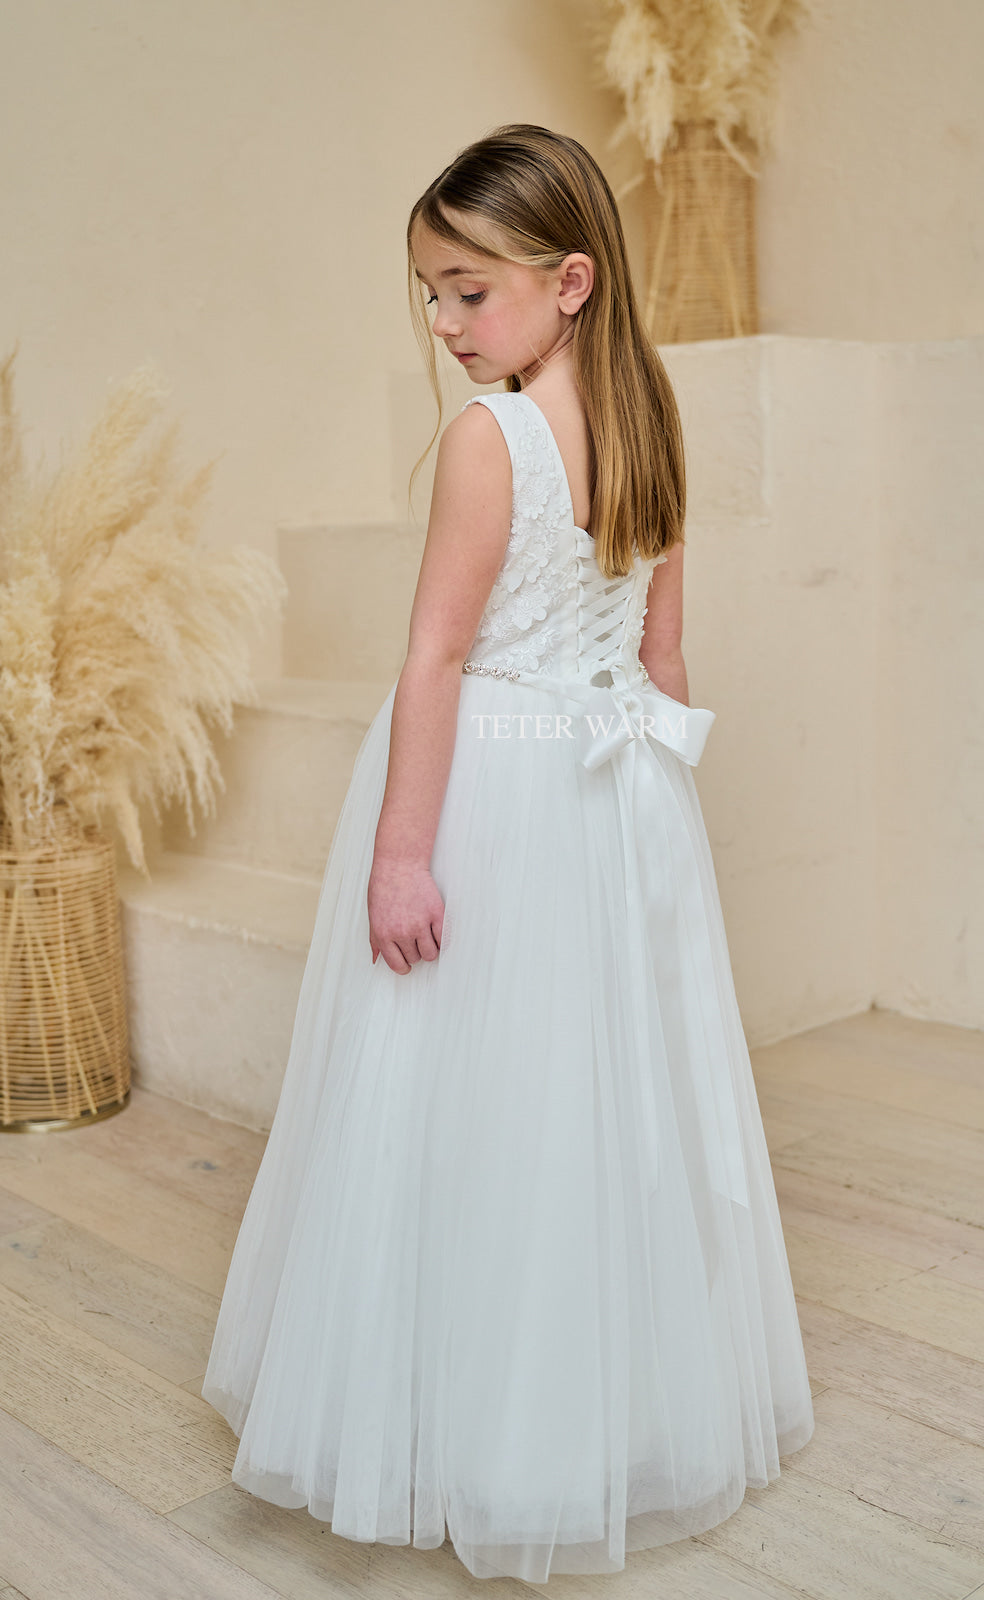 Shop the Elegant White Sleeveless Round Neck Communion Dress with Long Tulle Skirt, 3D Floral Plaque, and Tie in the Back - Perfect for Special Occasions!